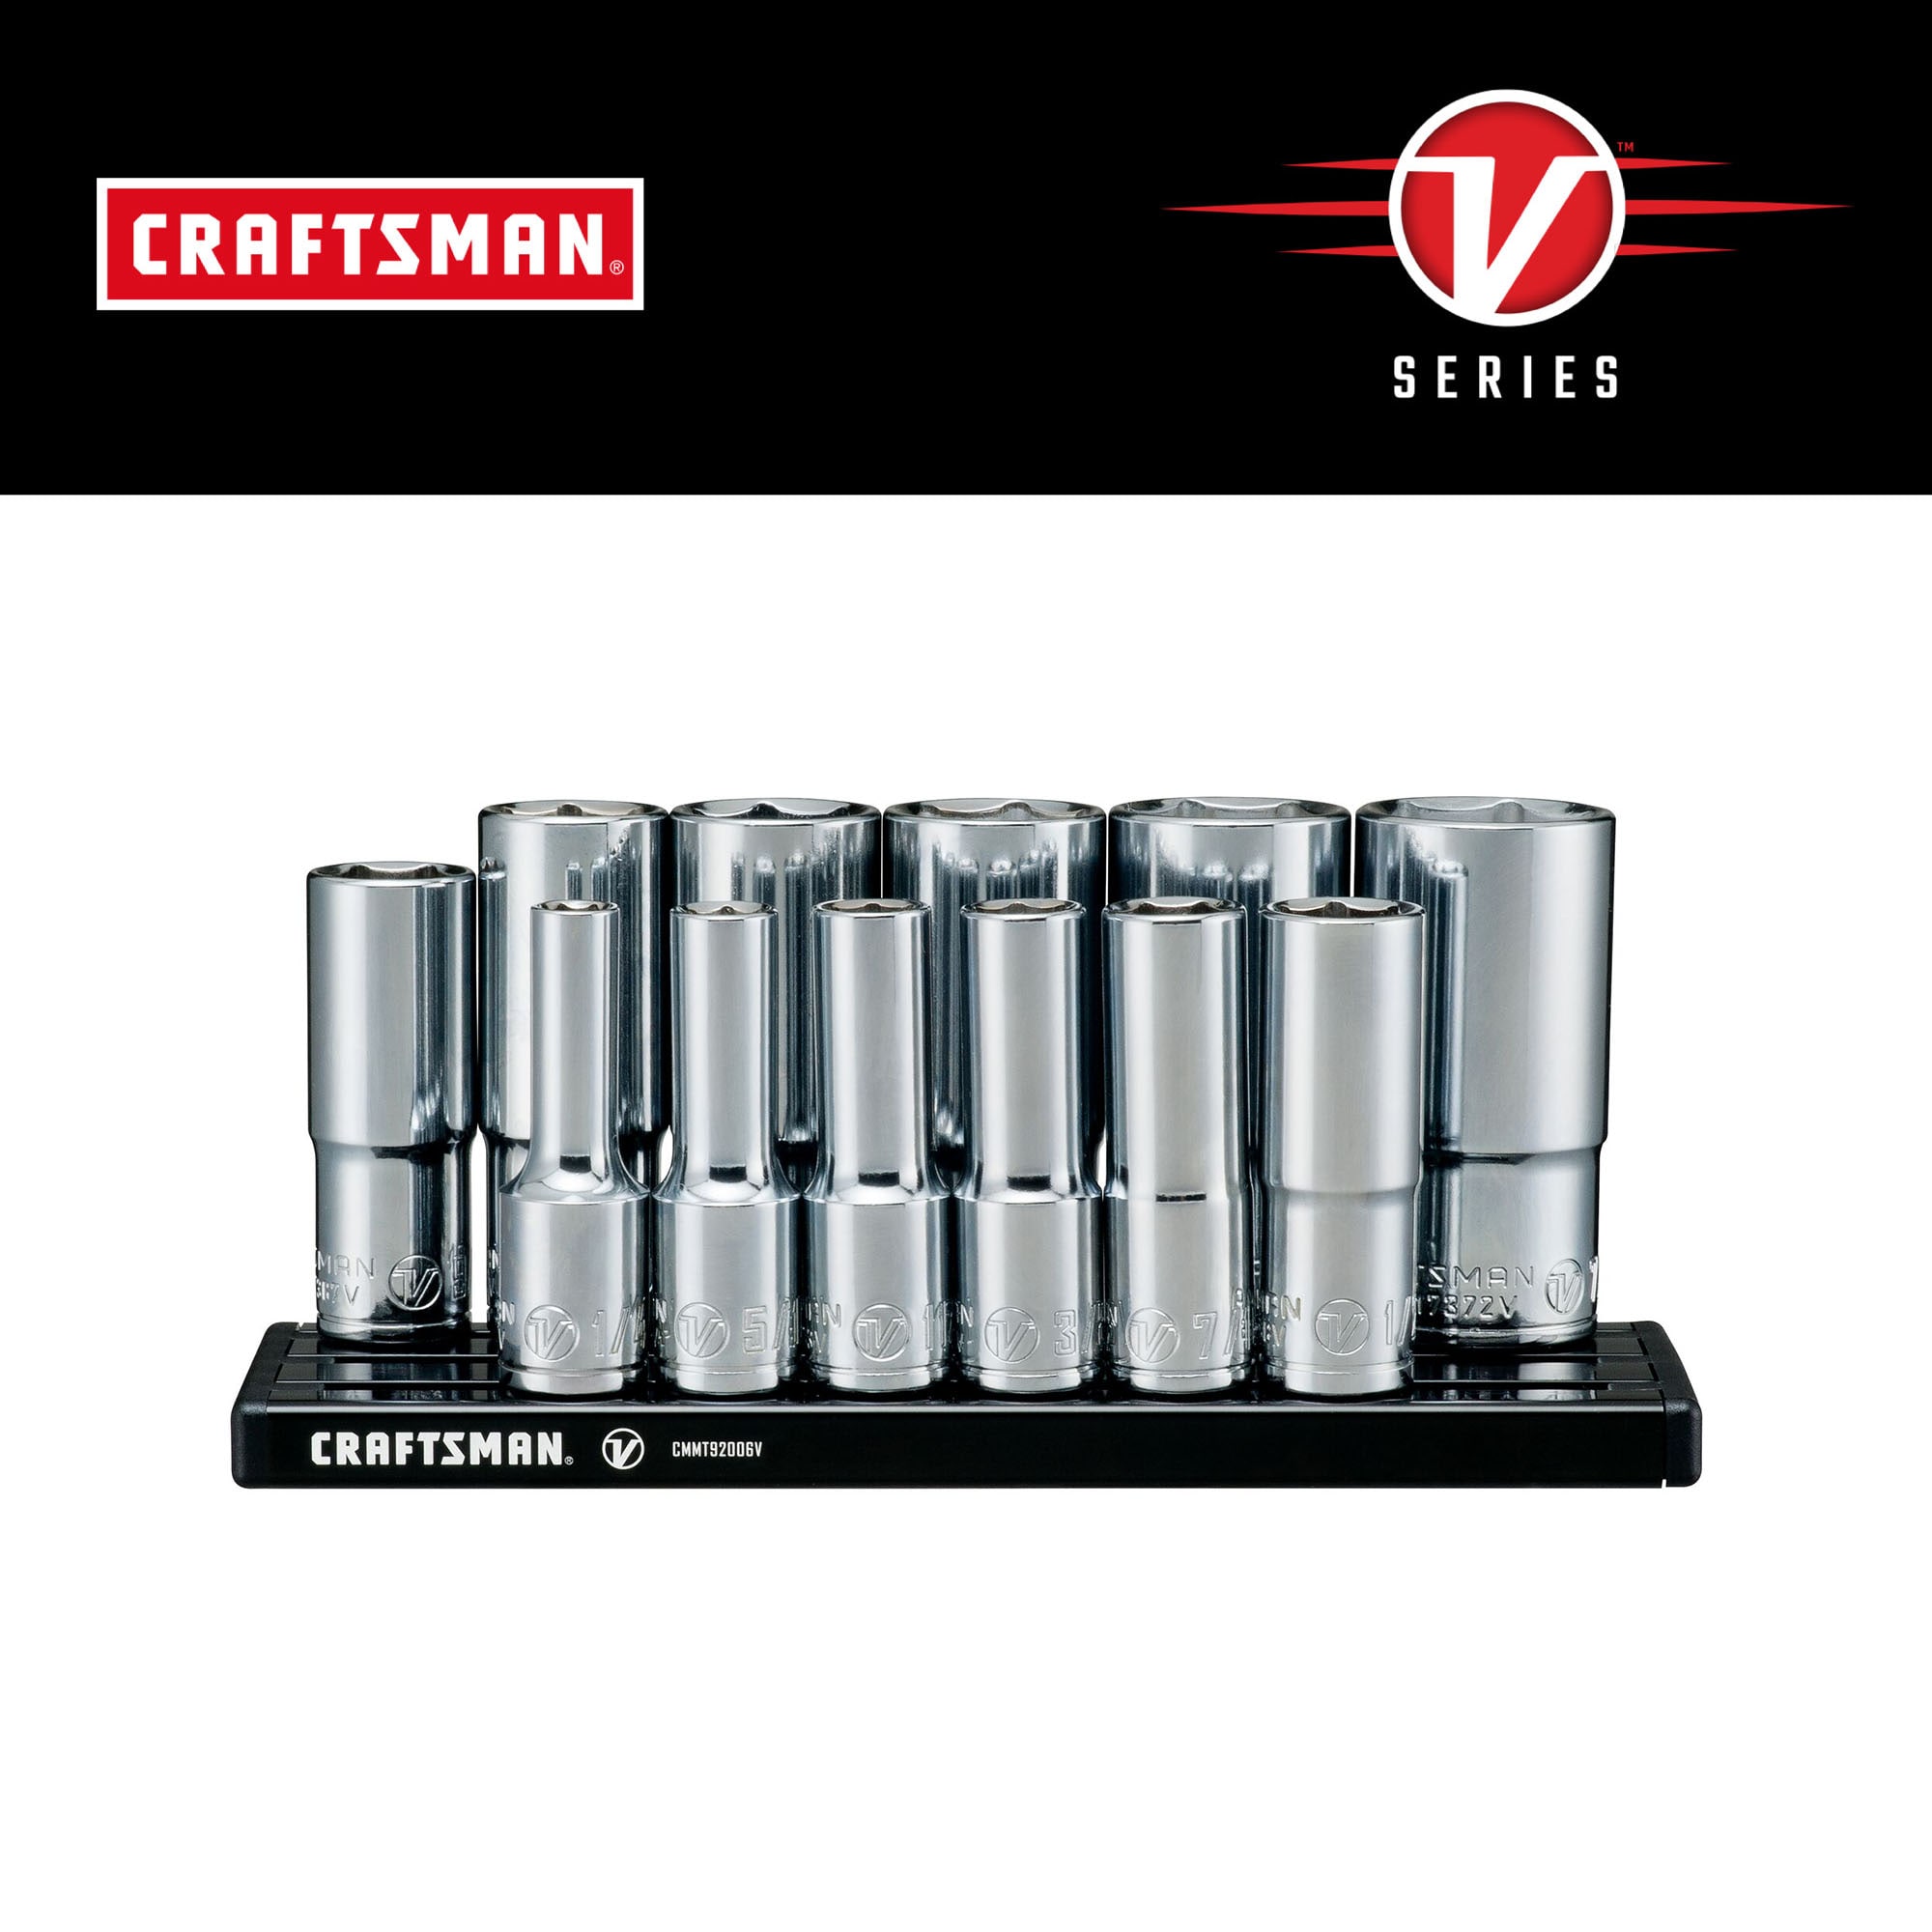 CRAFTSMAN V-Series 12-Piece Standard (SAE) 3/8-in Drive 6-point